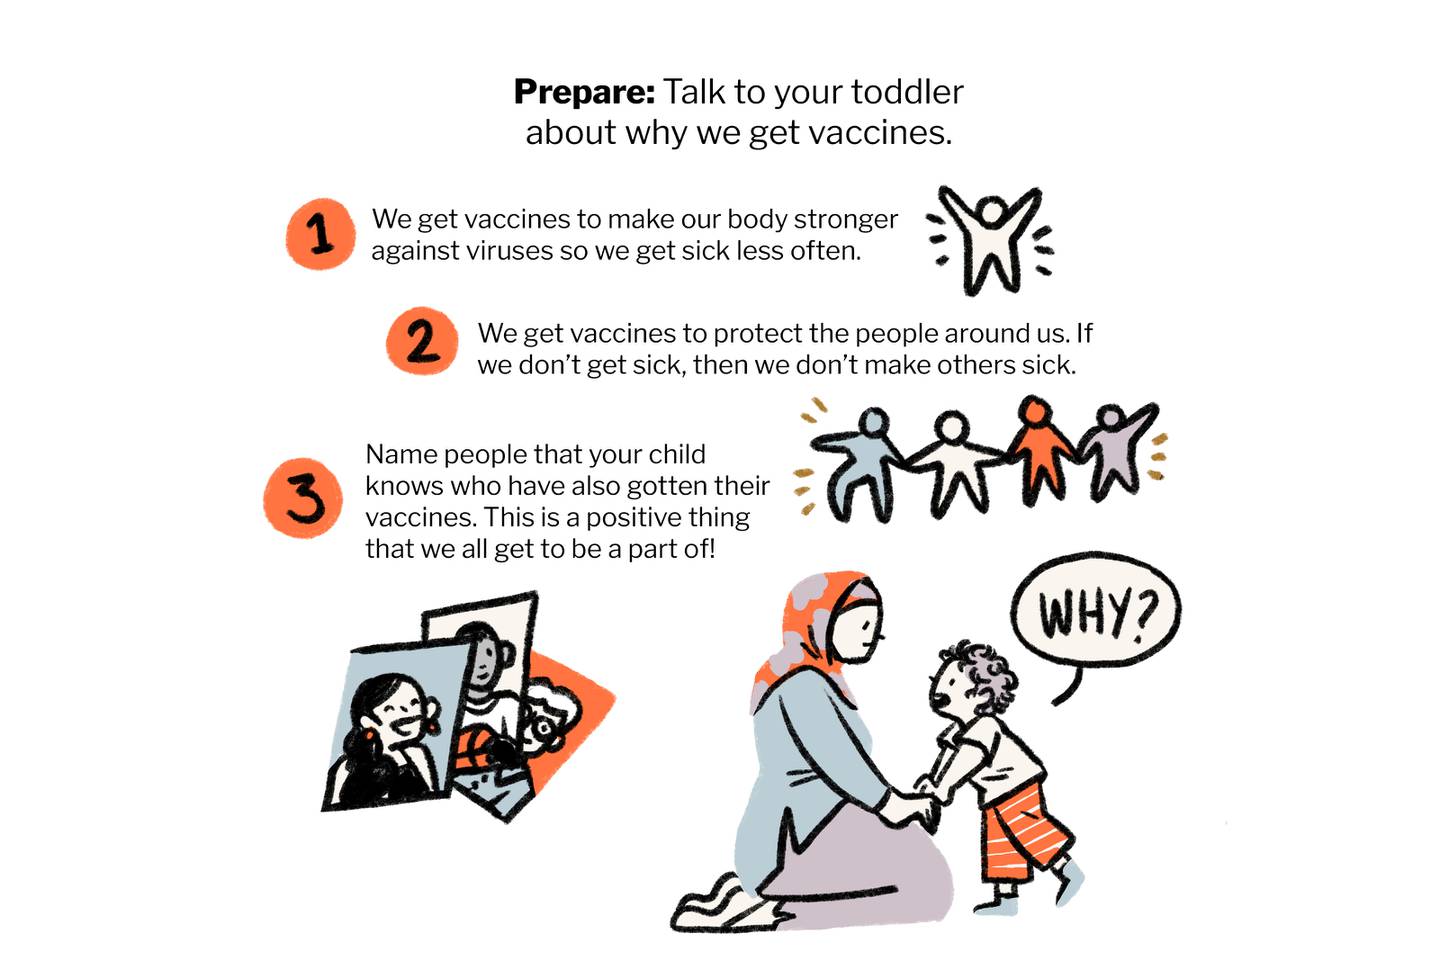 Prepare by talking to your toddler about why we get vaccines: to get sick less often and to protect others. Tell them who they know who have gotten vaccinated.